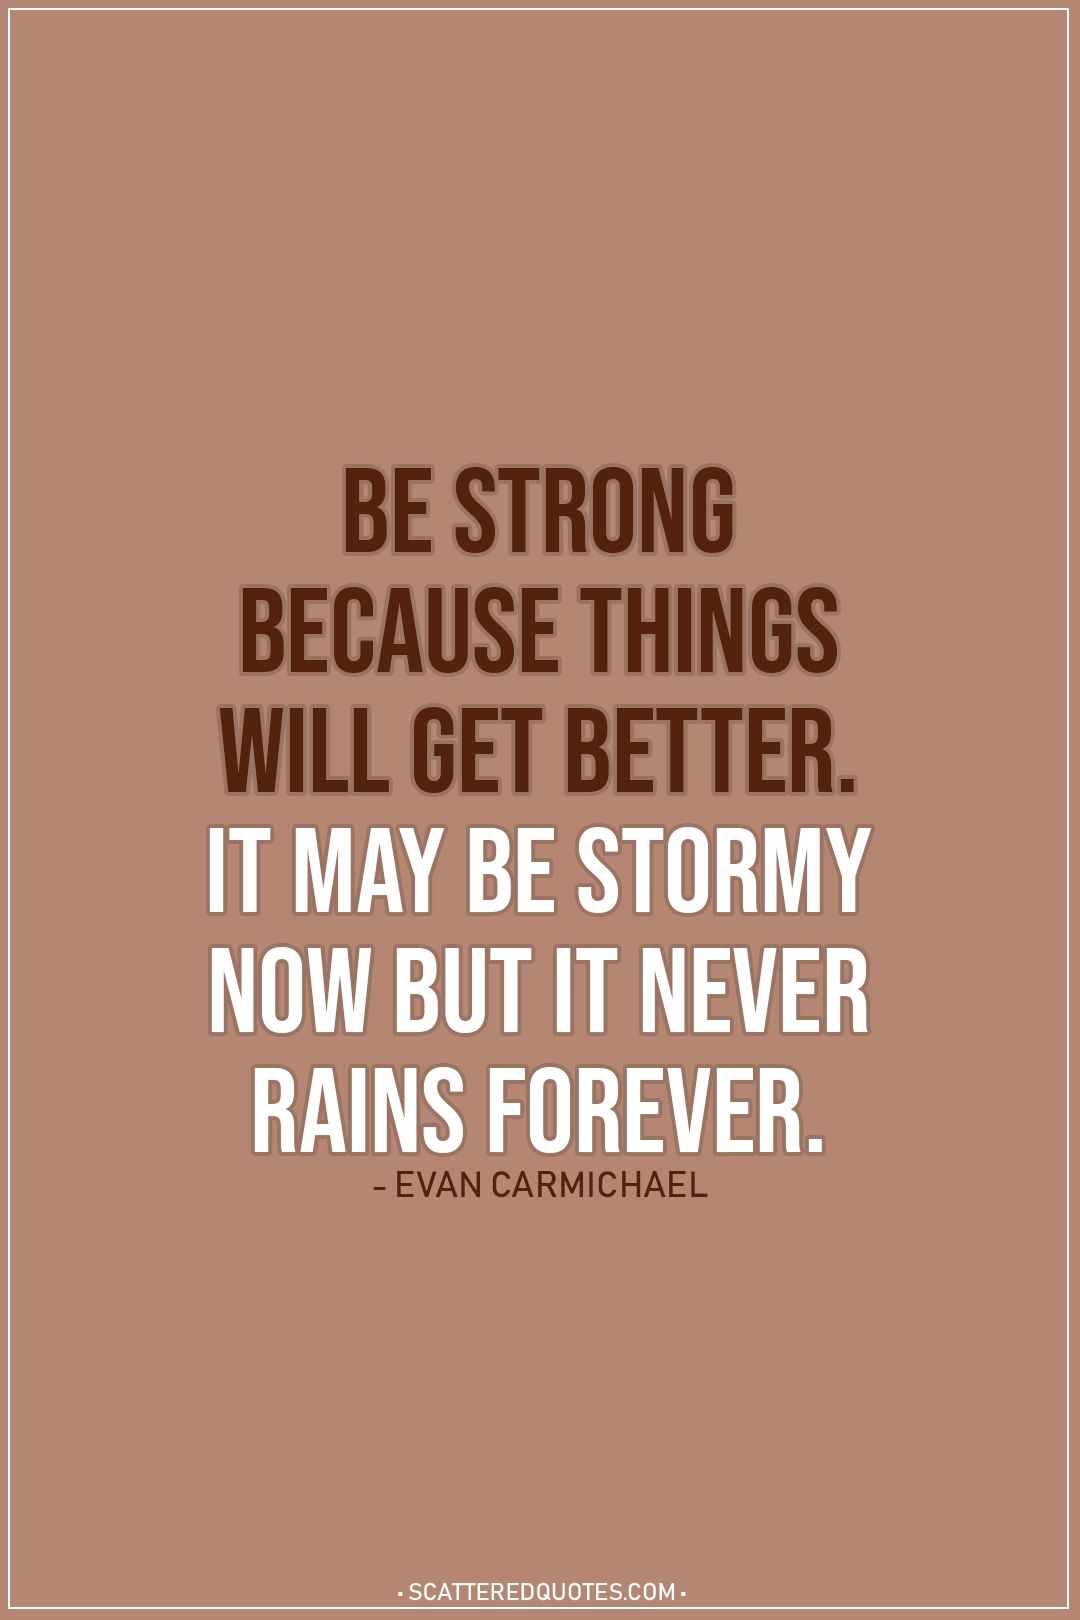 Strong Strength Quotes - Shortquotes.cc